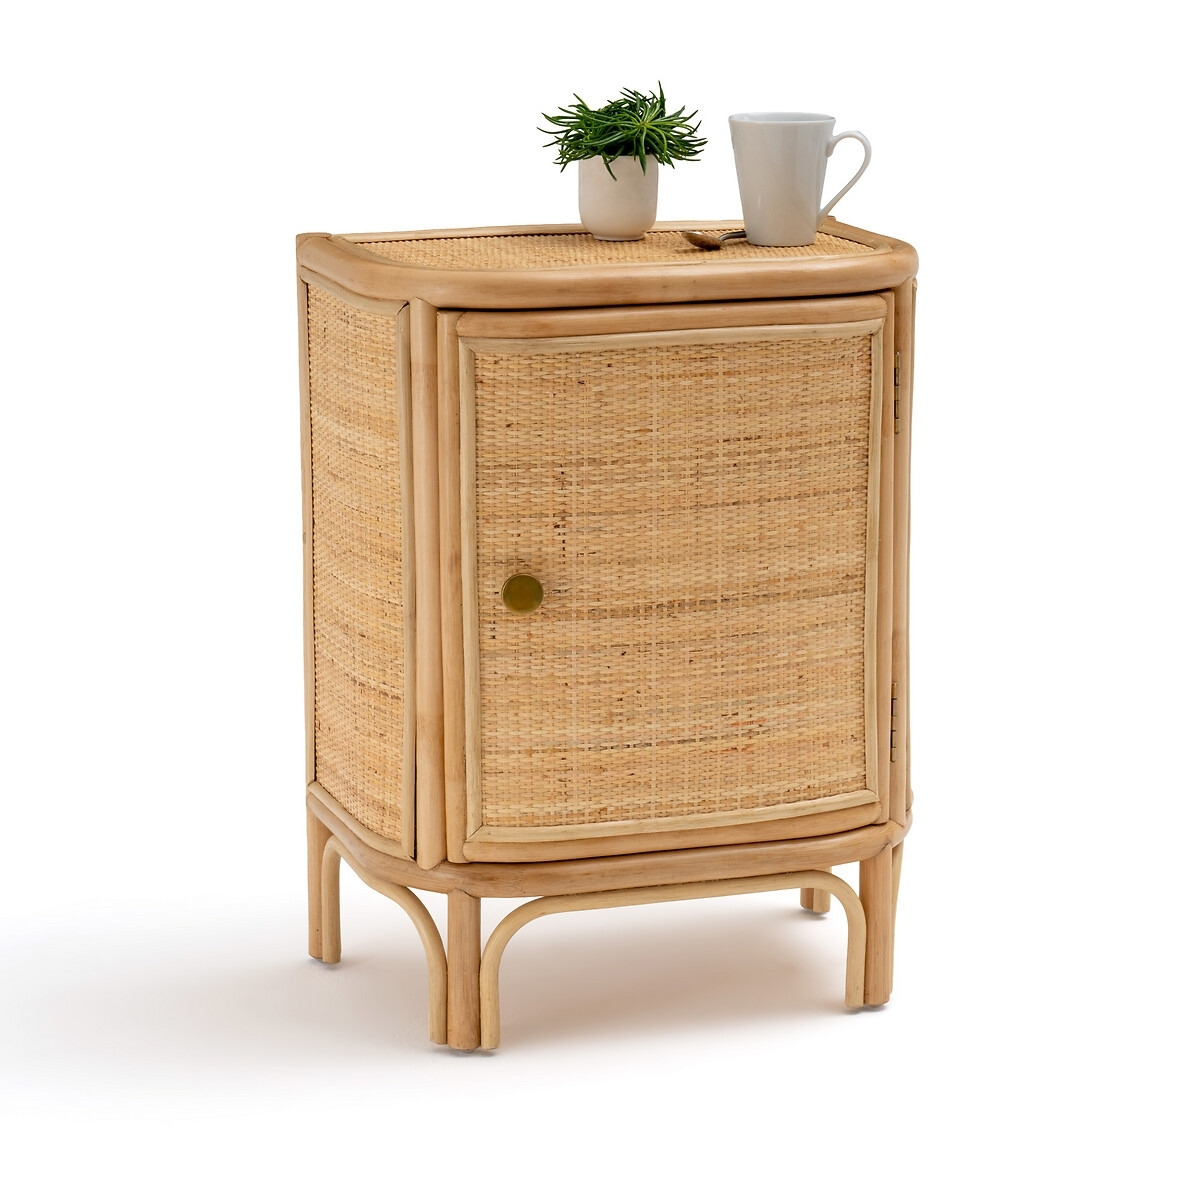 Ladara Bedside Cabinet (Door Opens to the Right) - image 1